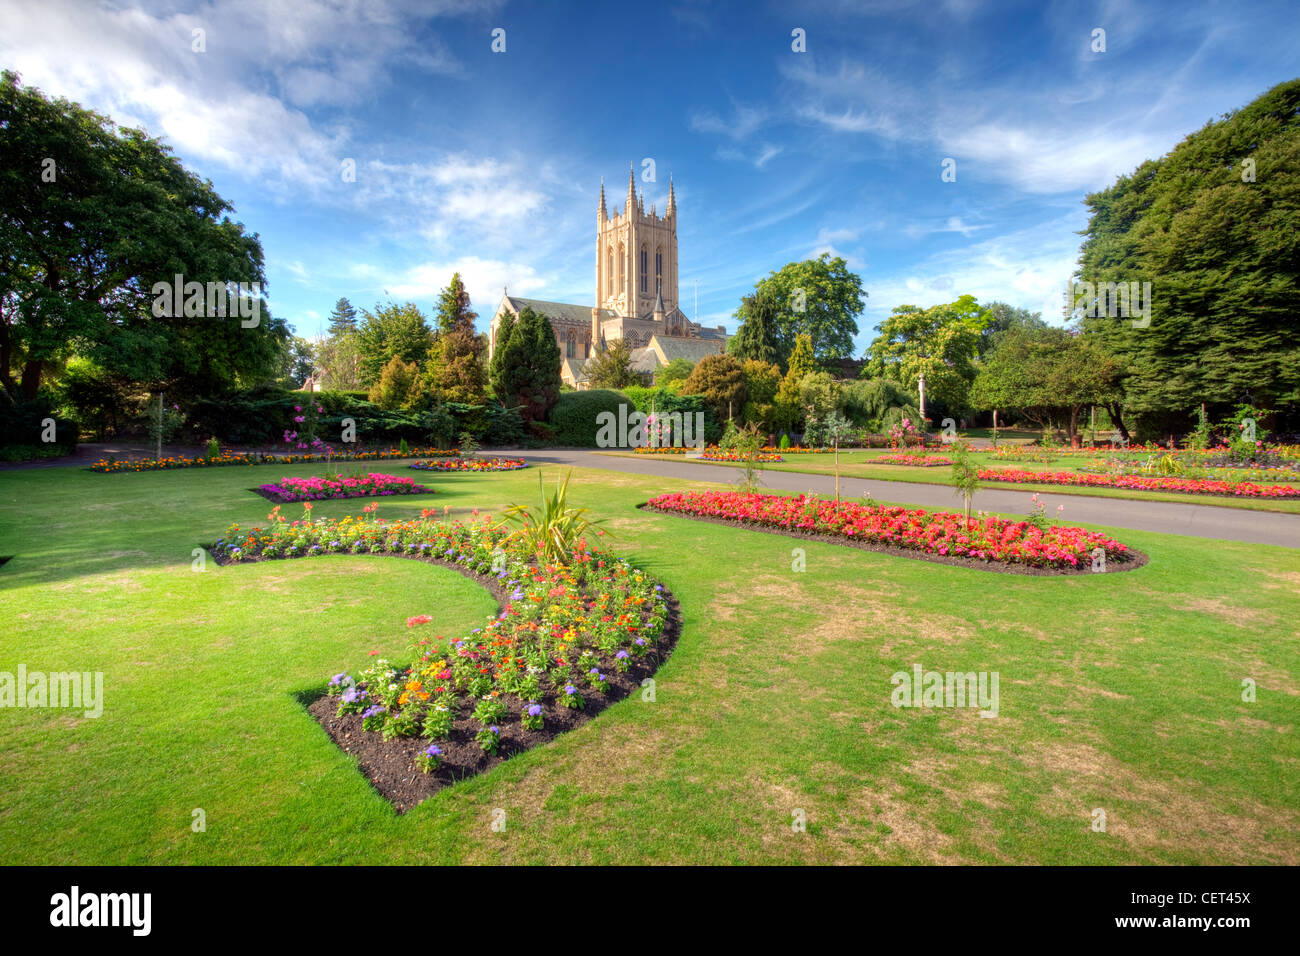 View over the Abbey Gardens to St Edmundsbury Cathedral, built in 1503 as St James' Church becoming a Cathedral in 1914. Stock Photo